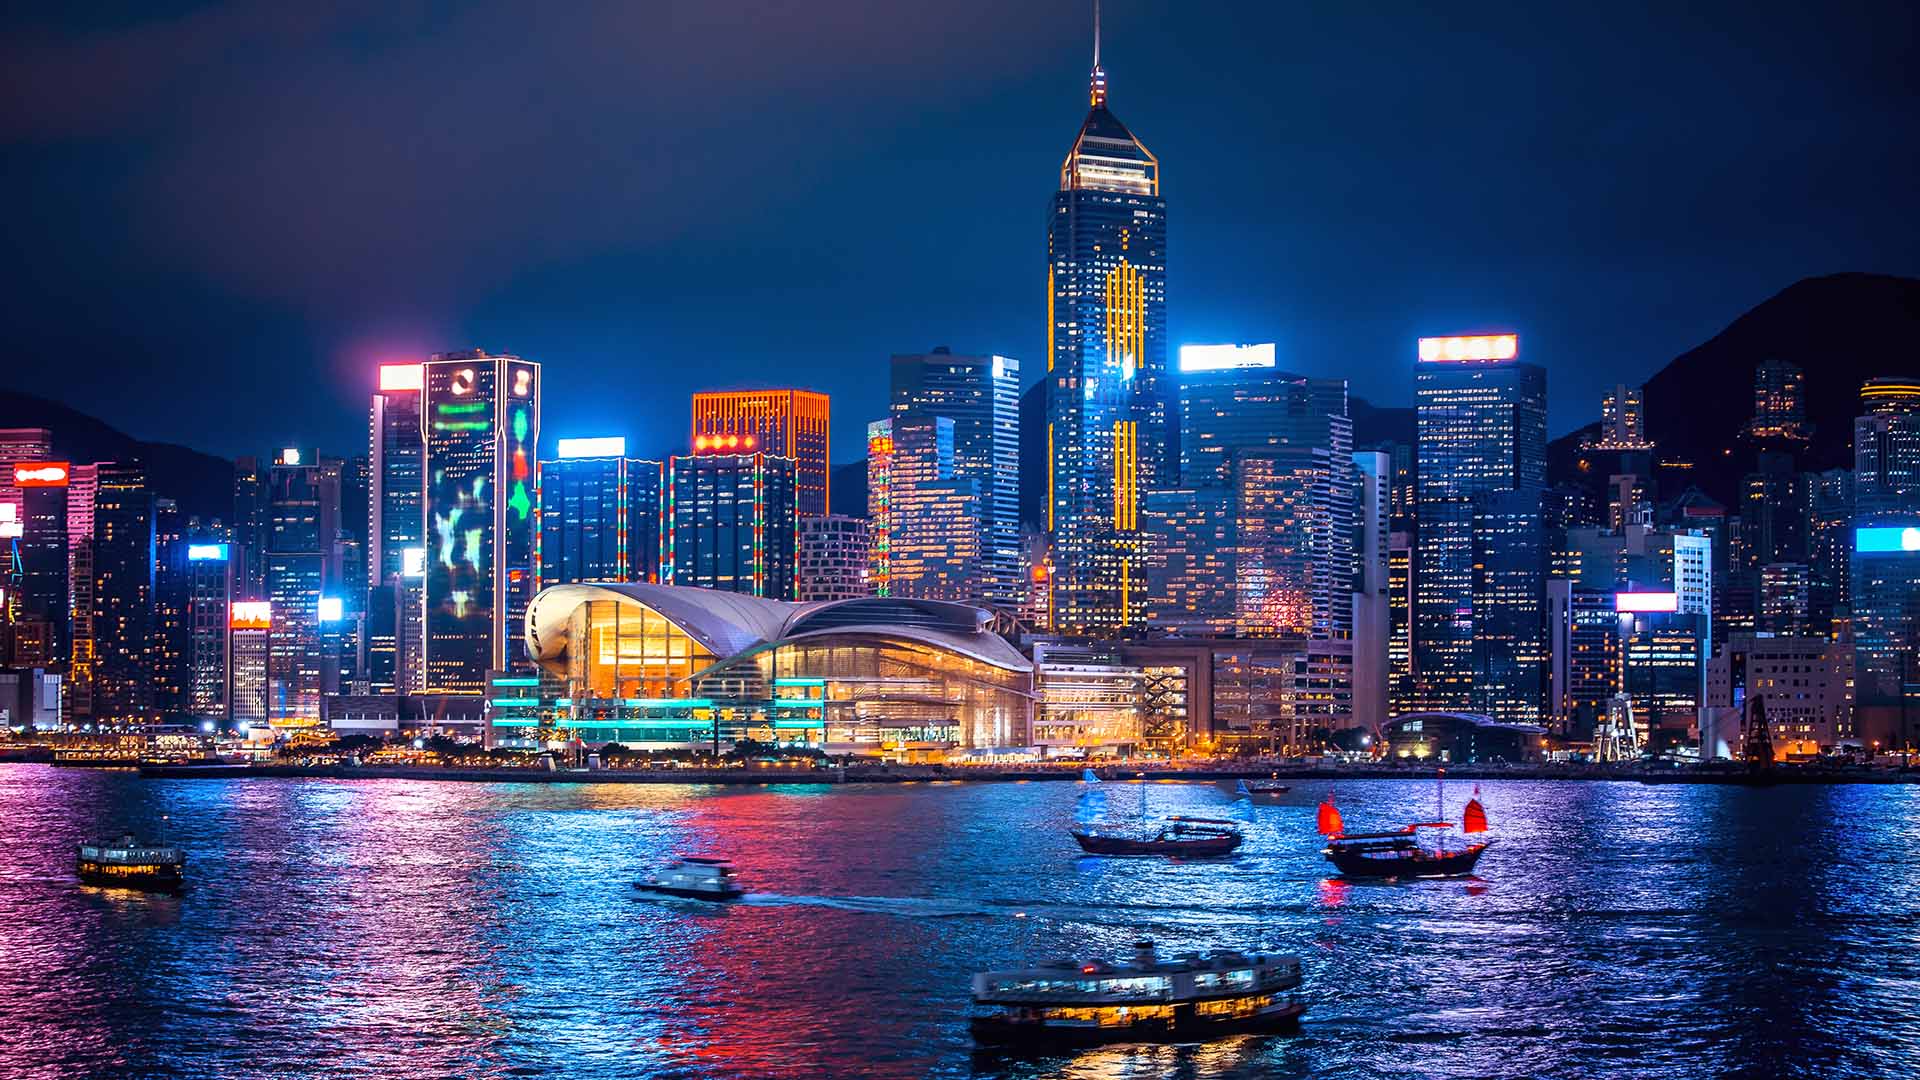 10 tips for making the most of your Hong Kong trip | Hong Kong Tourism Board